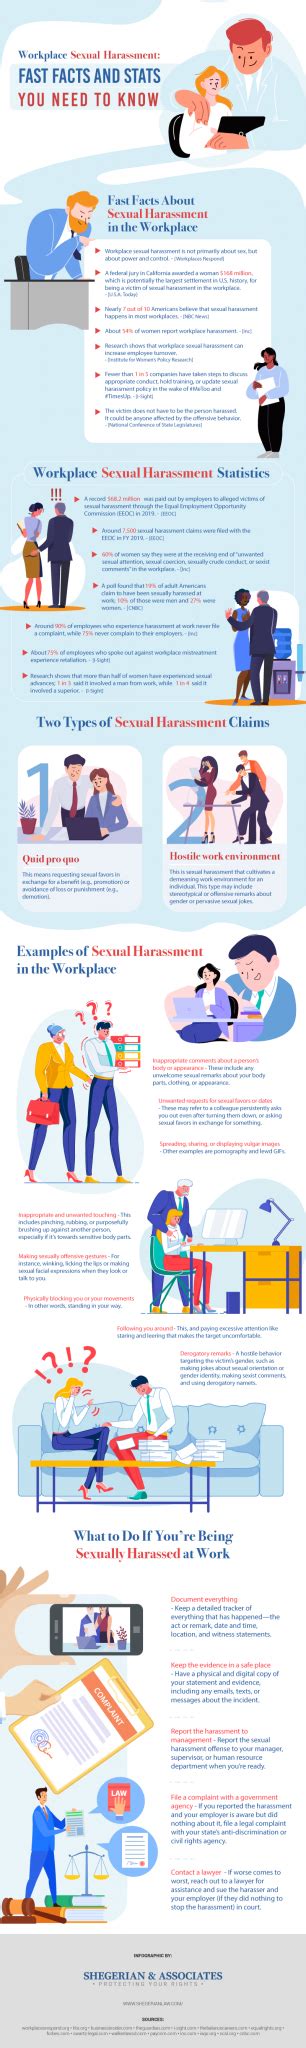 workplace sexual harassment infographic portal